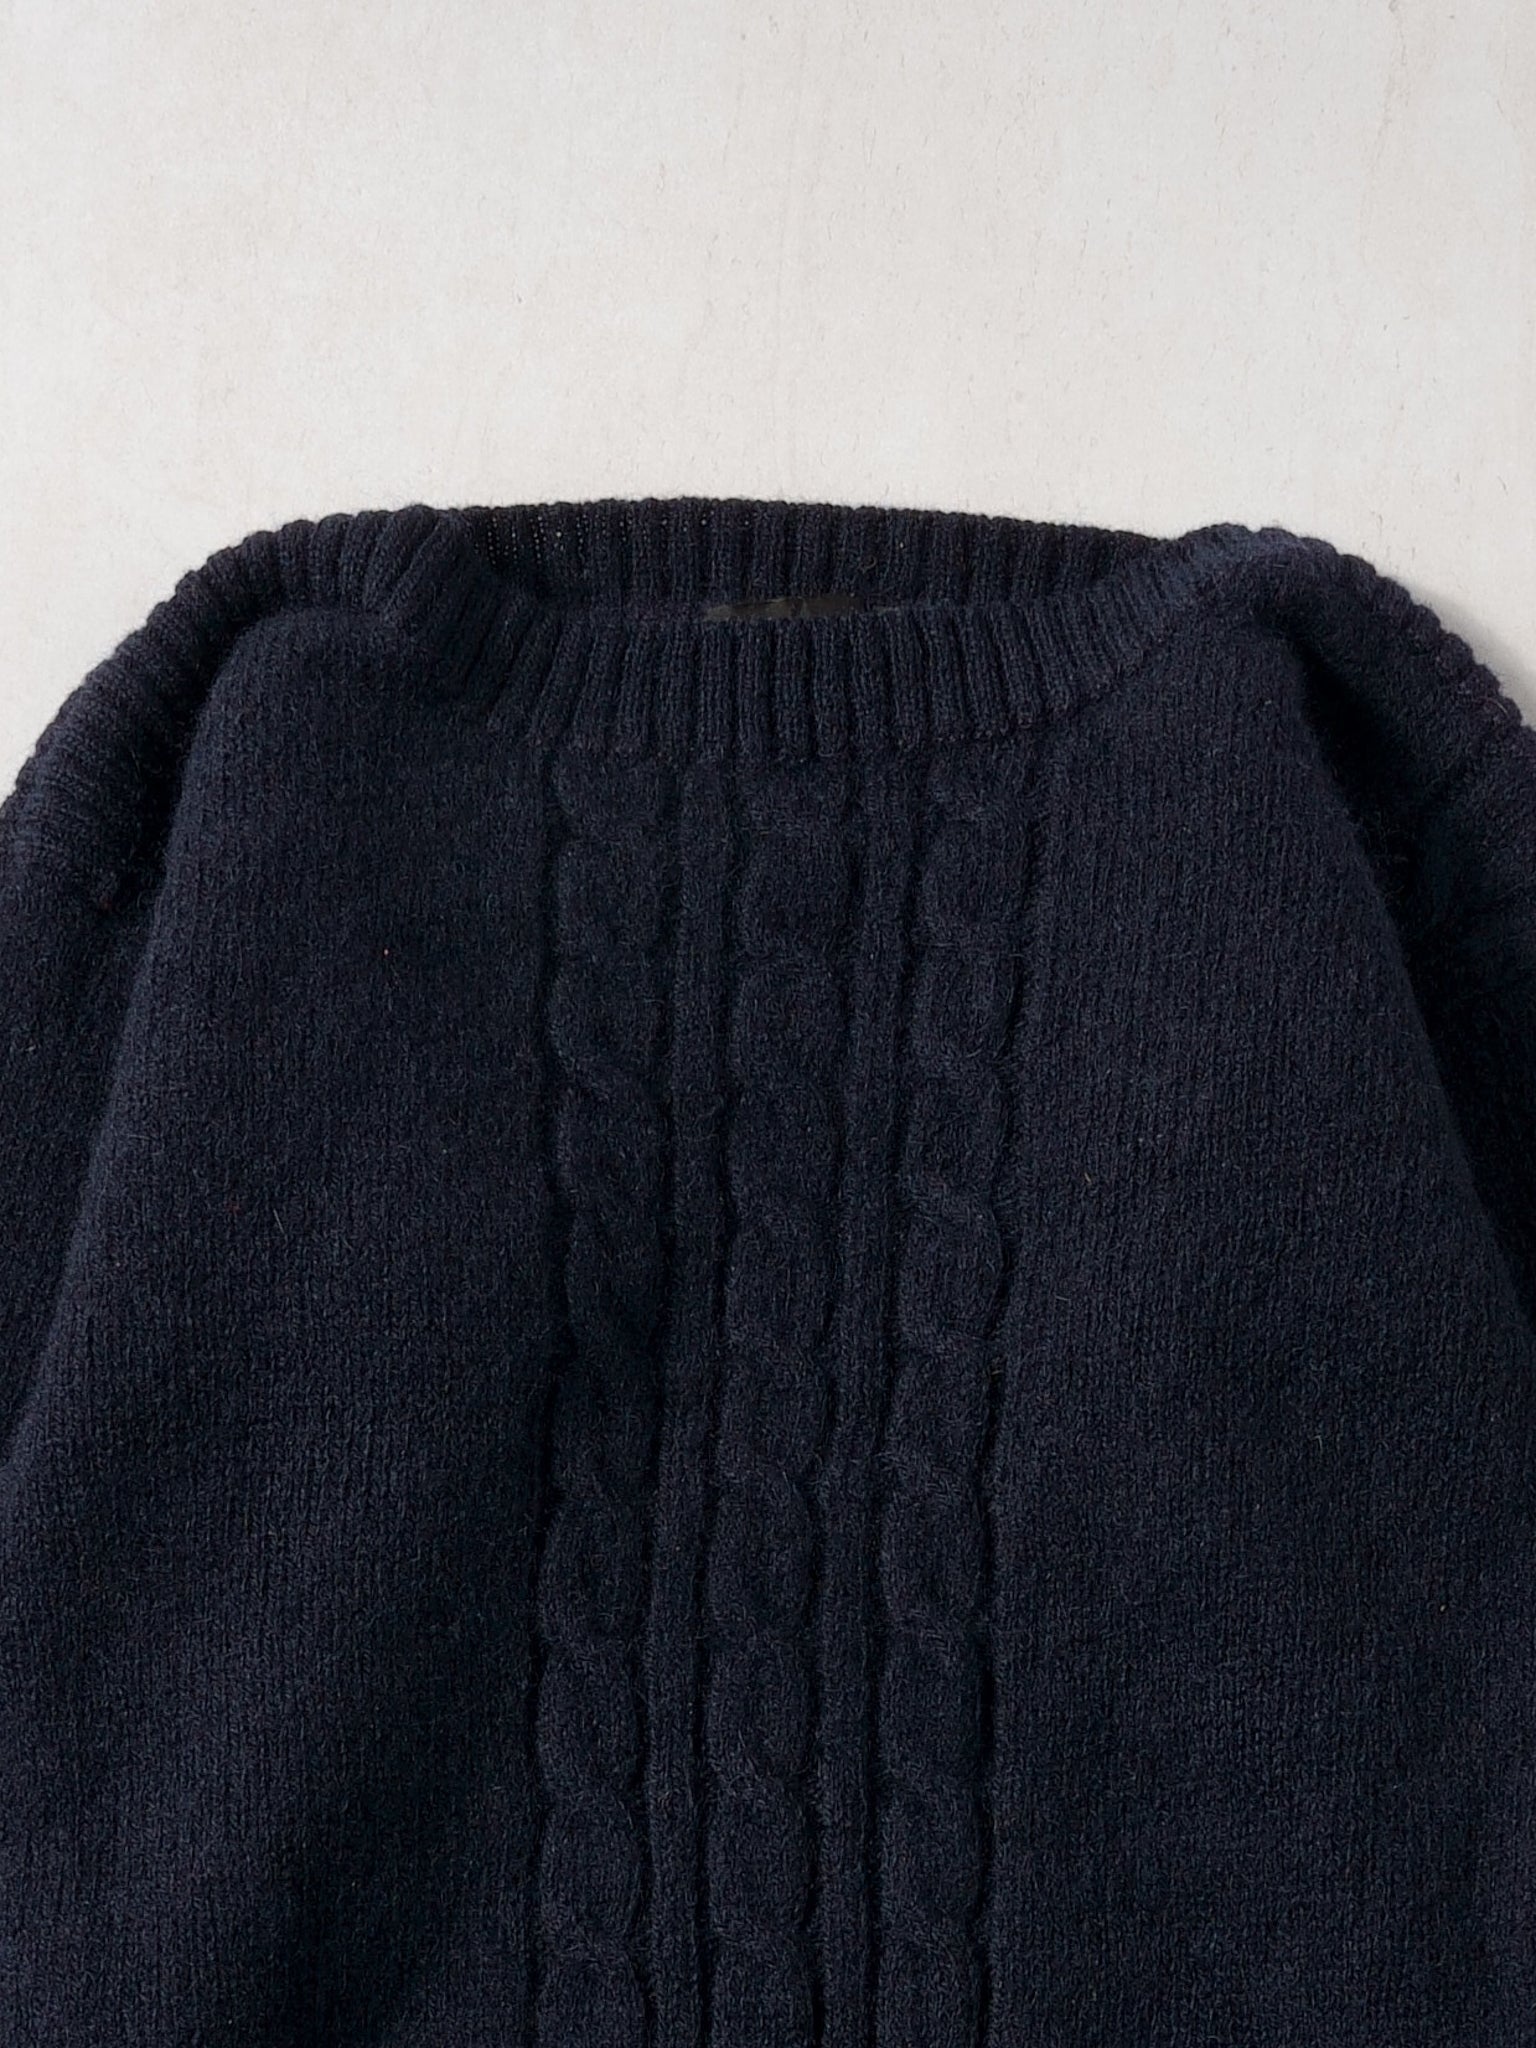 Vintage 90s Navy Blue YSL Cable Knit Pattern Wool Sweater (XS)